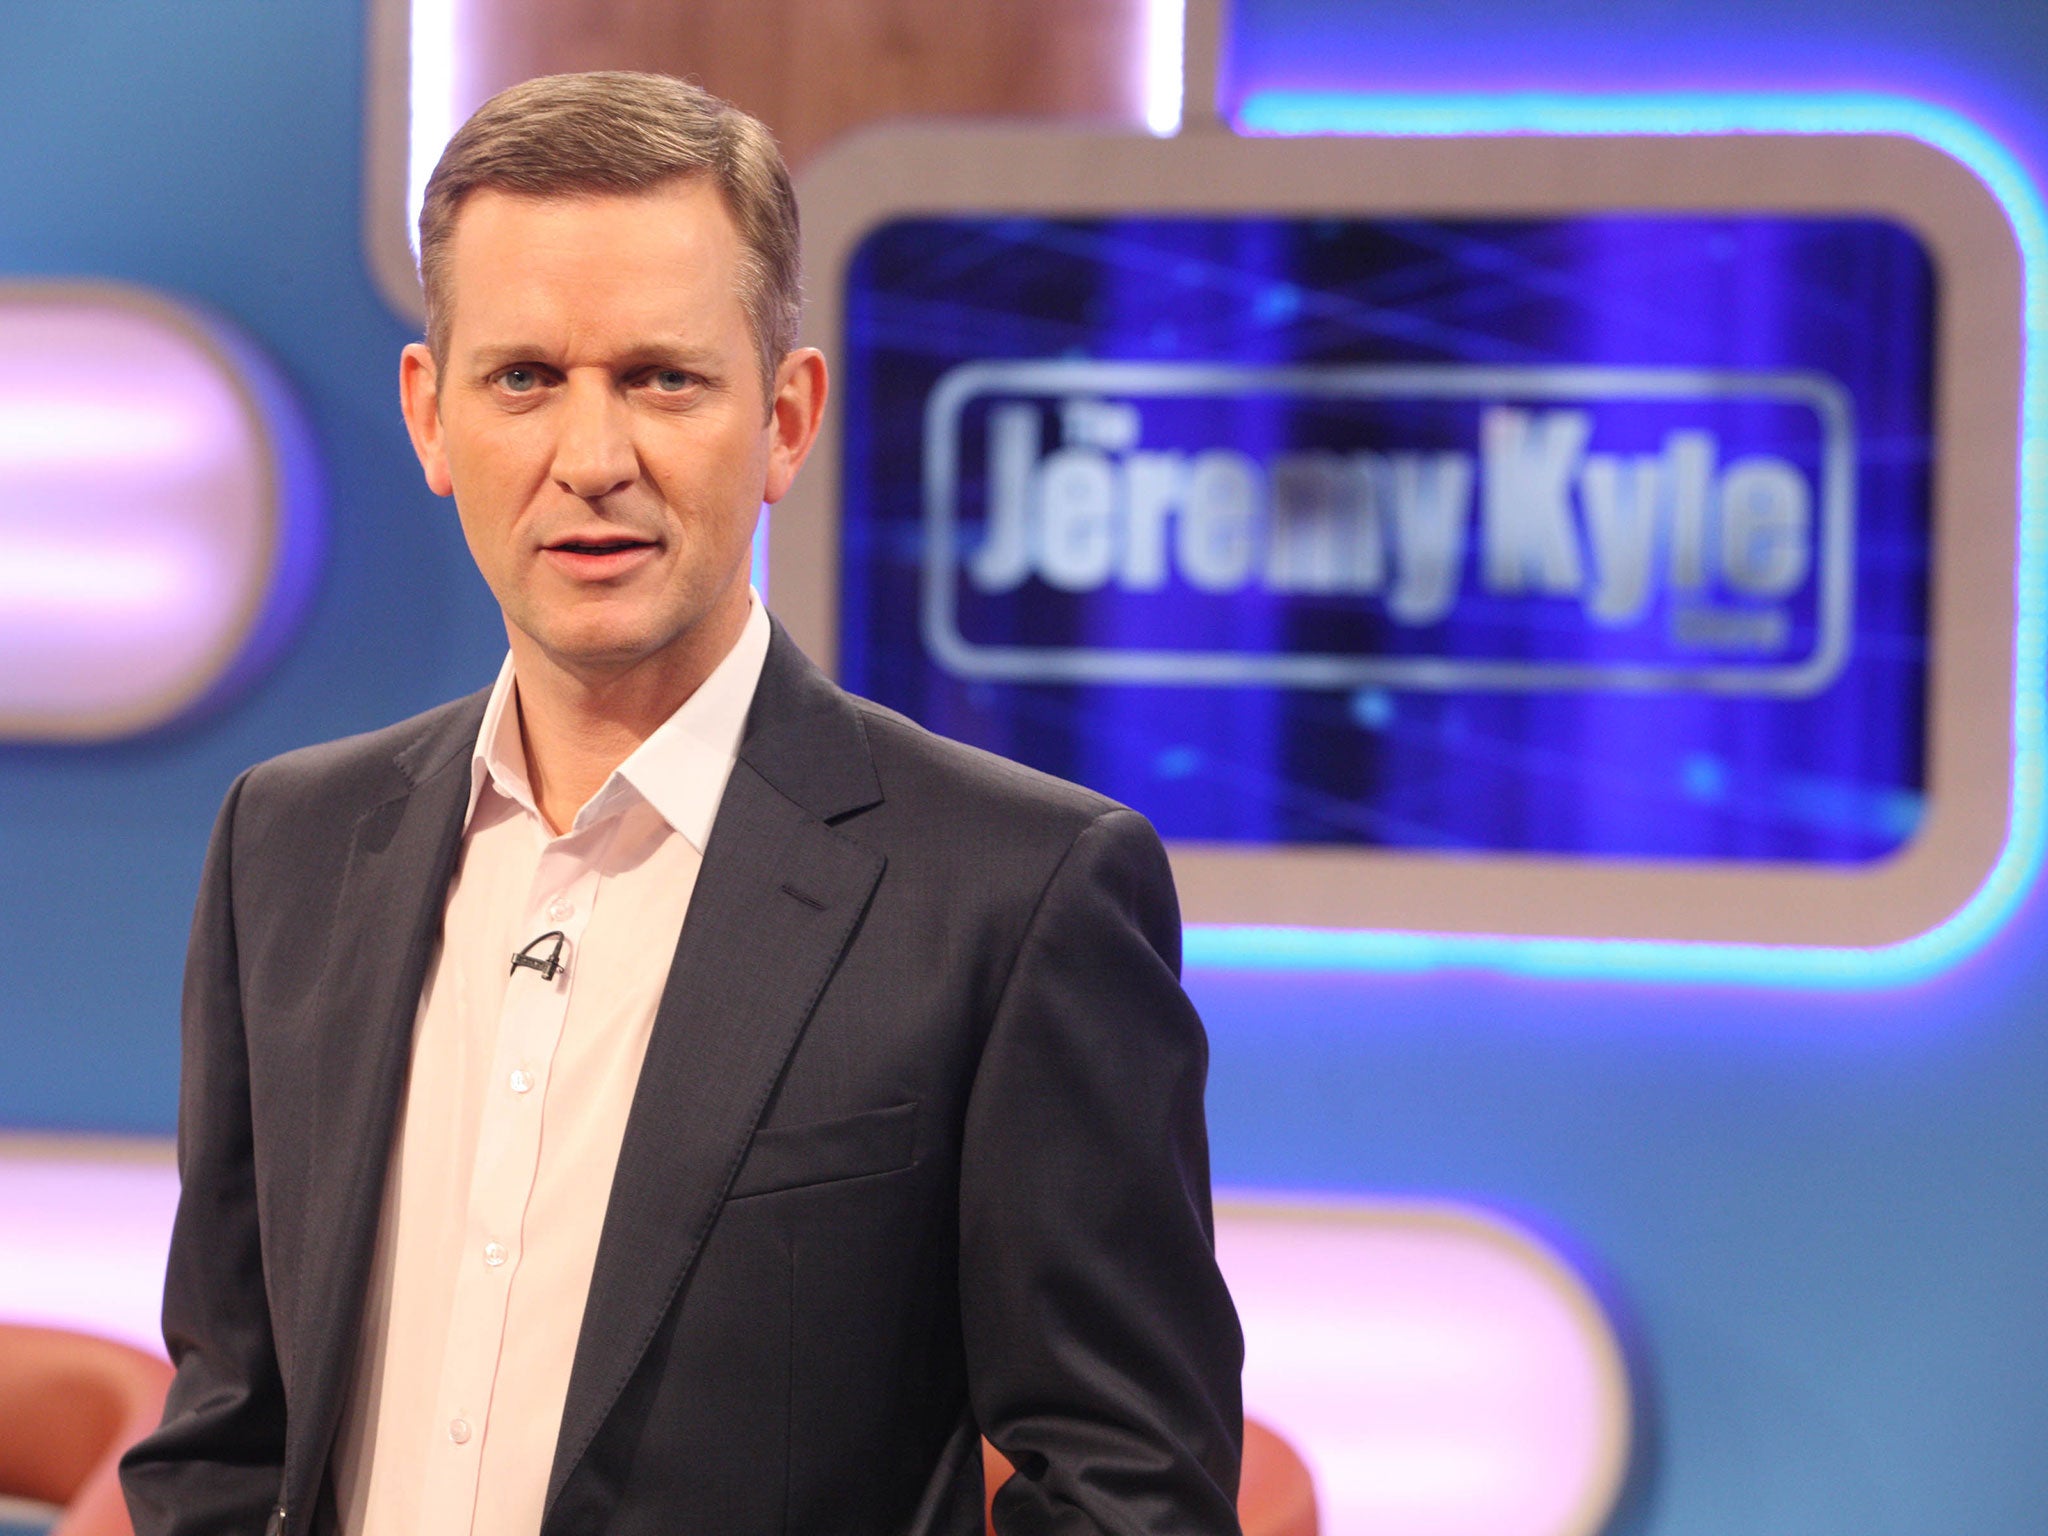 Jeremy Kyle stepped in after his The Jeremy Kyle Show audience laughed at a male abuse victim